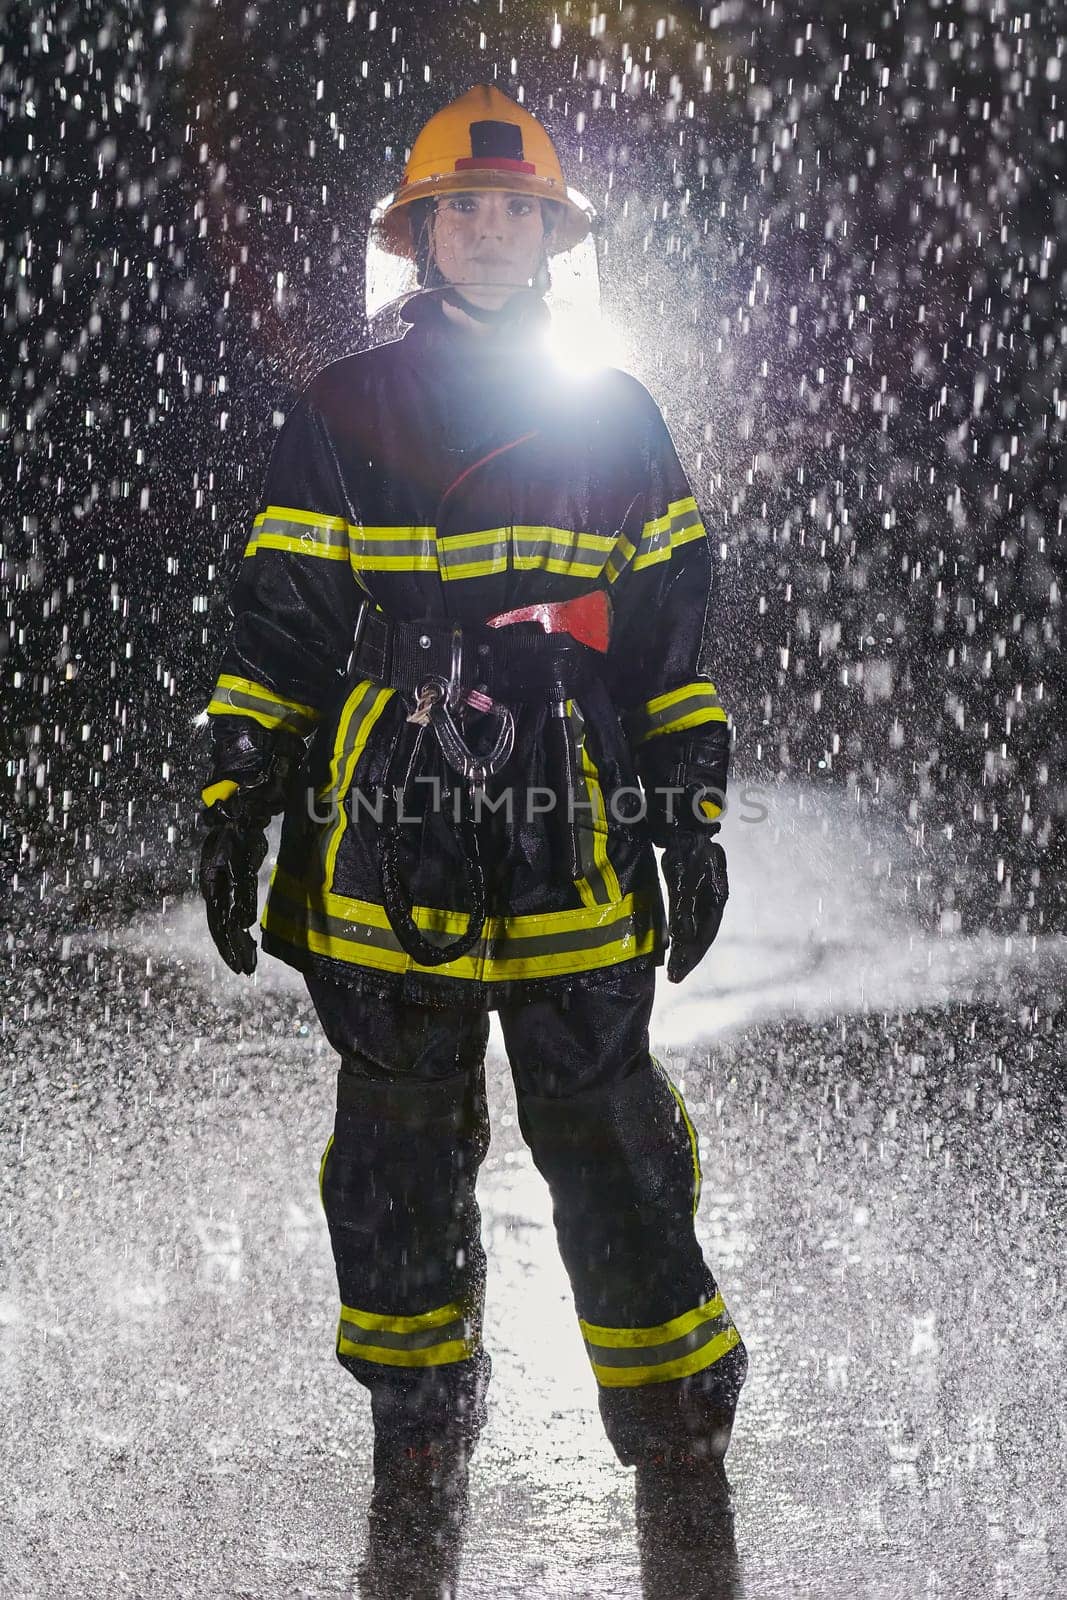 A determined female firefighter in a professional uniform striding through the dangerous, rainy night on a daring rescue mission, showcasing her unwavering bravery and commitment to saving lives